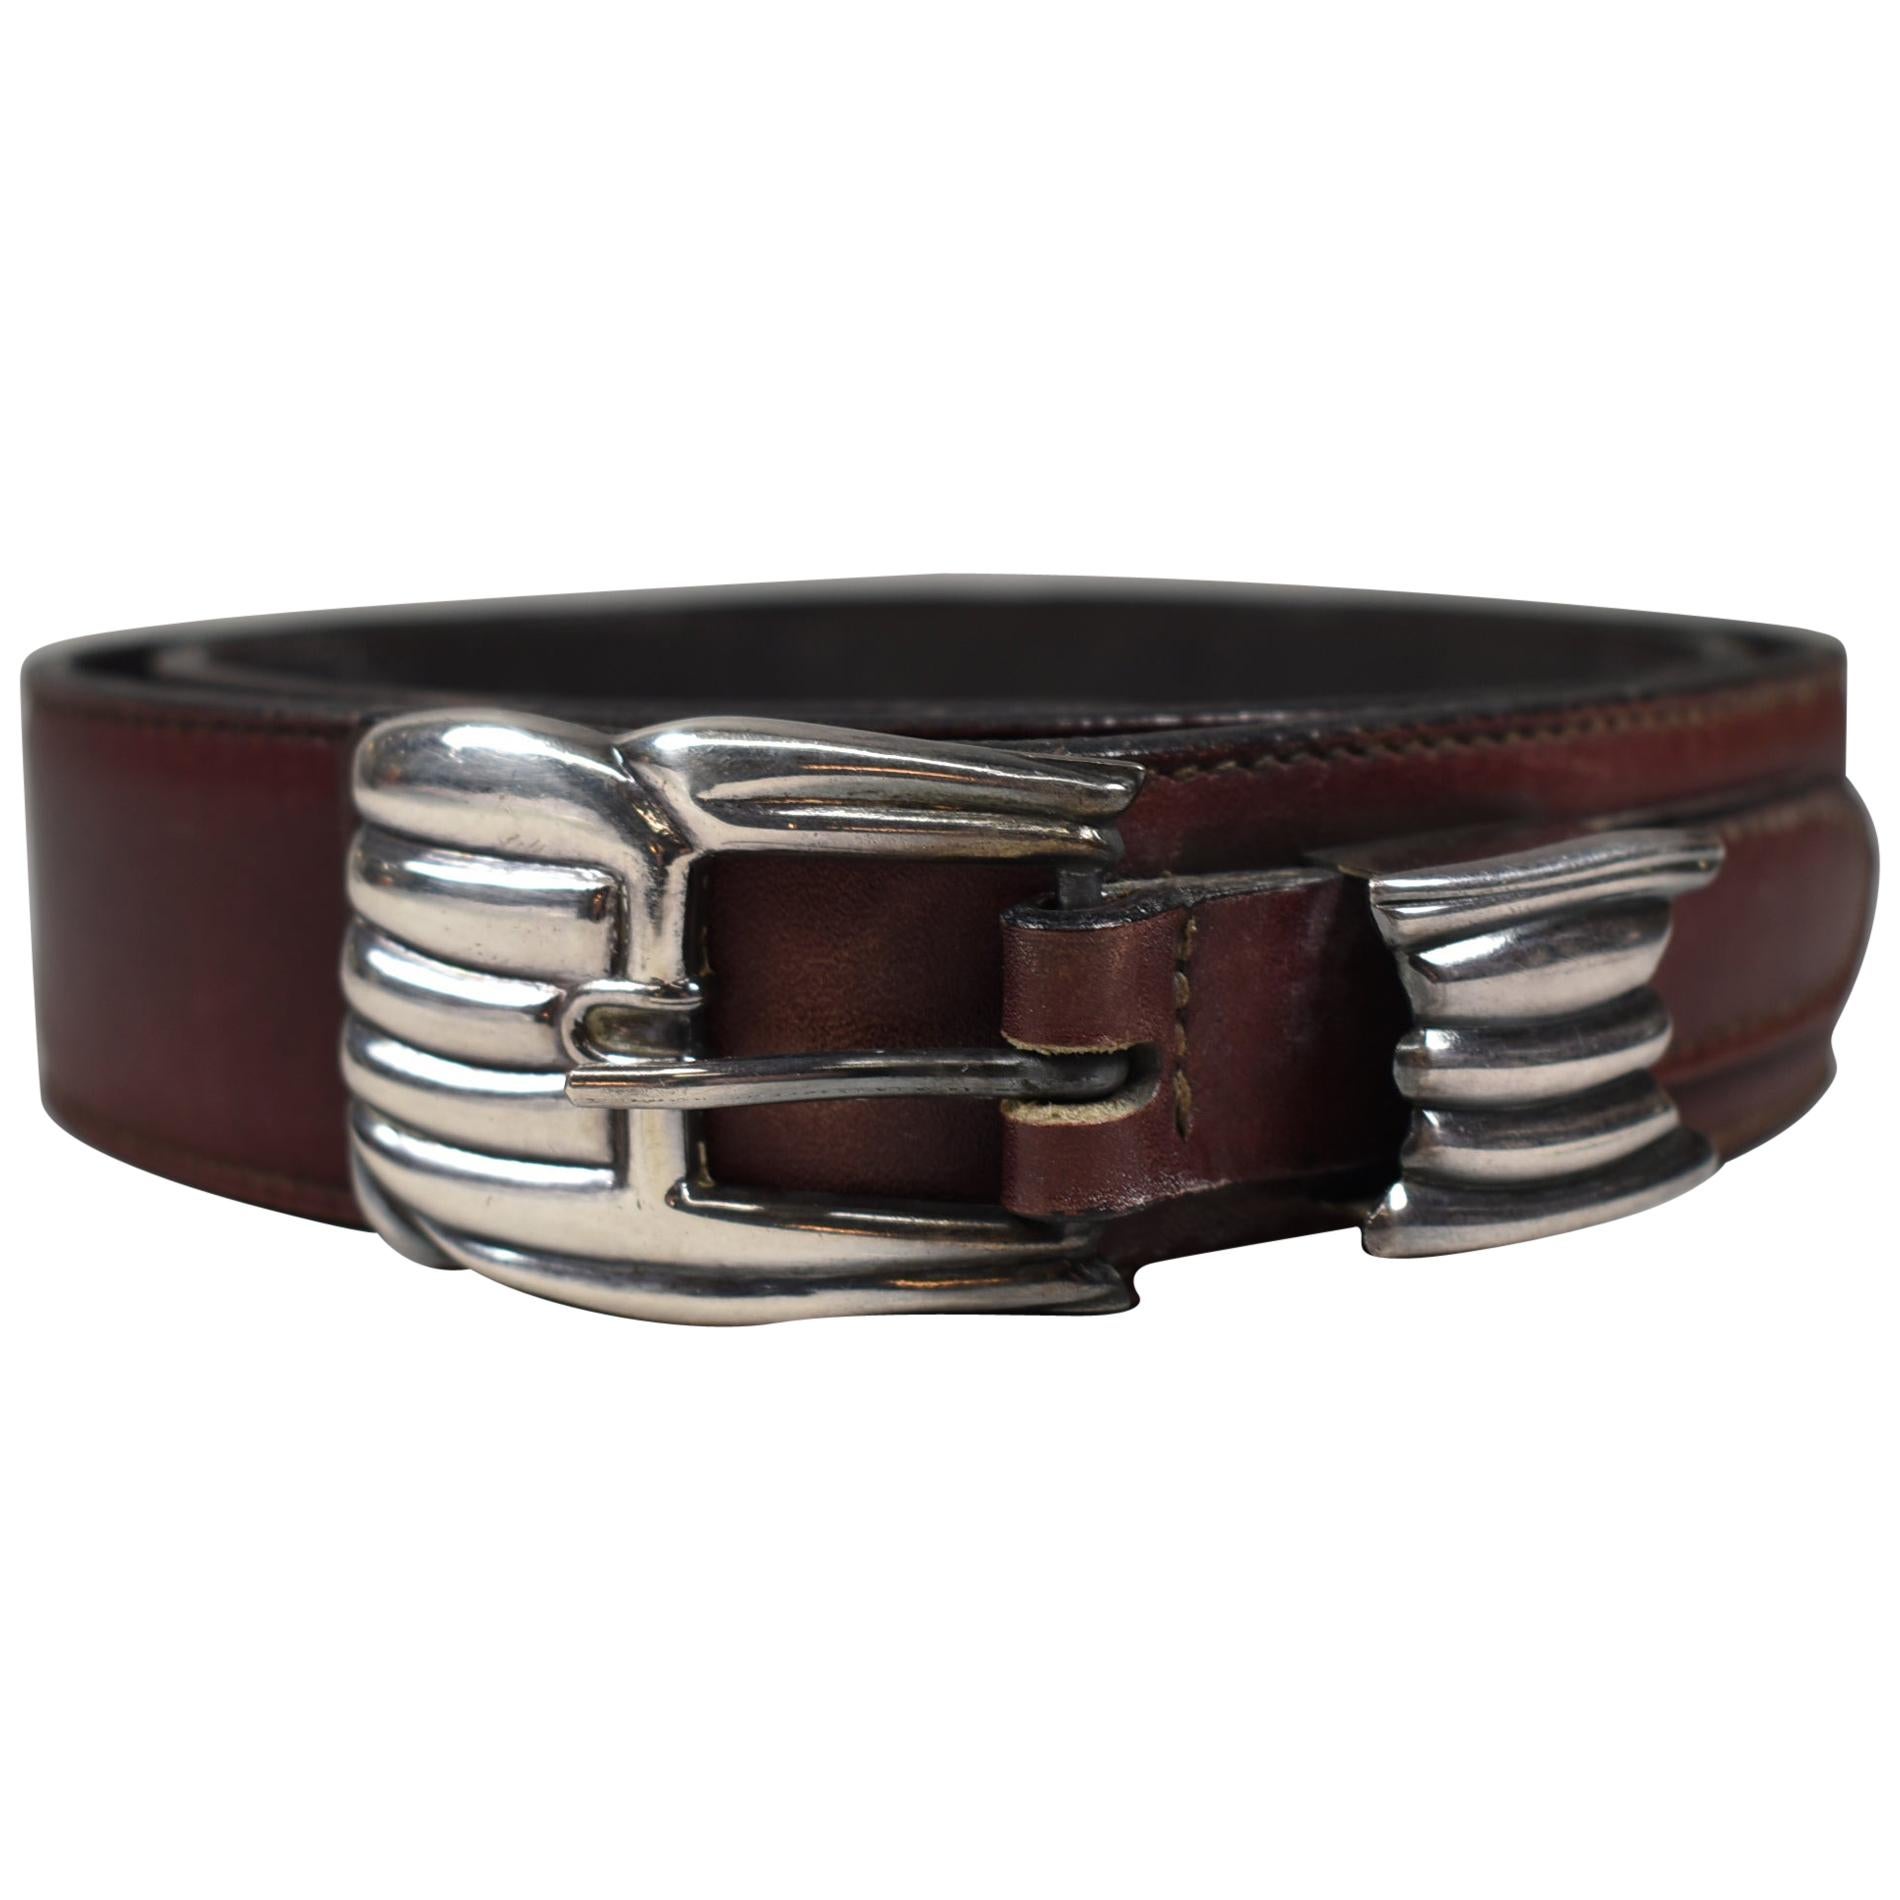 C G Italian Leather Belt with Sterling Silver Buckle